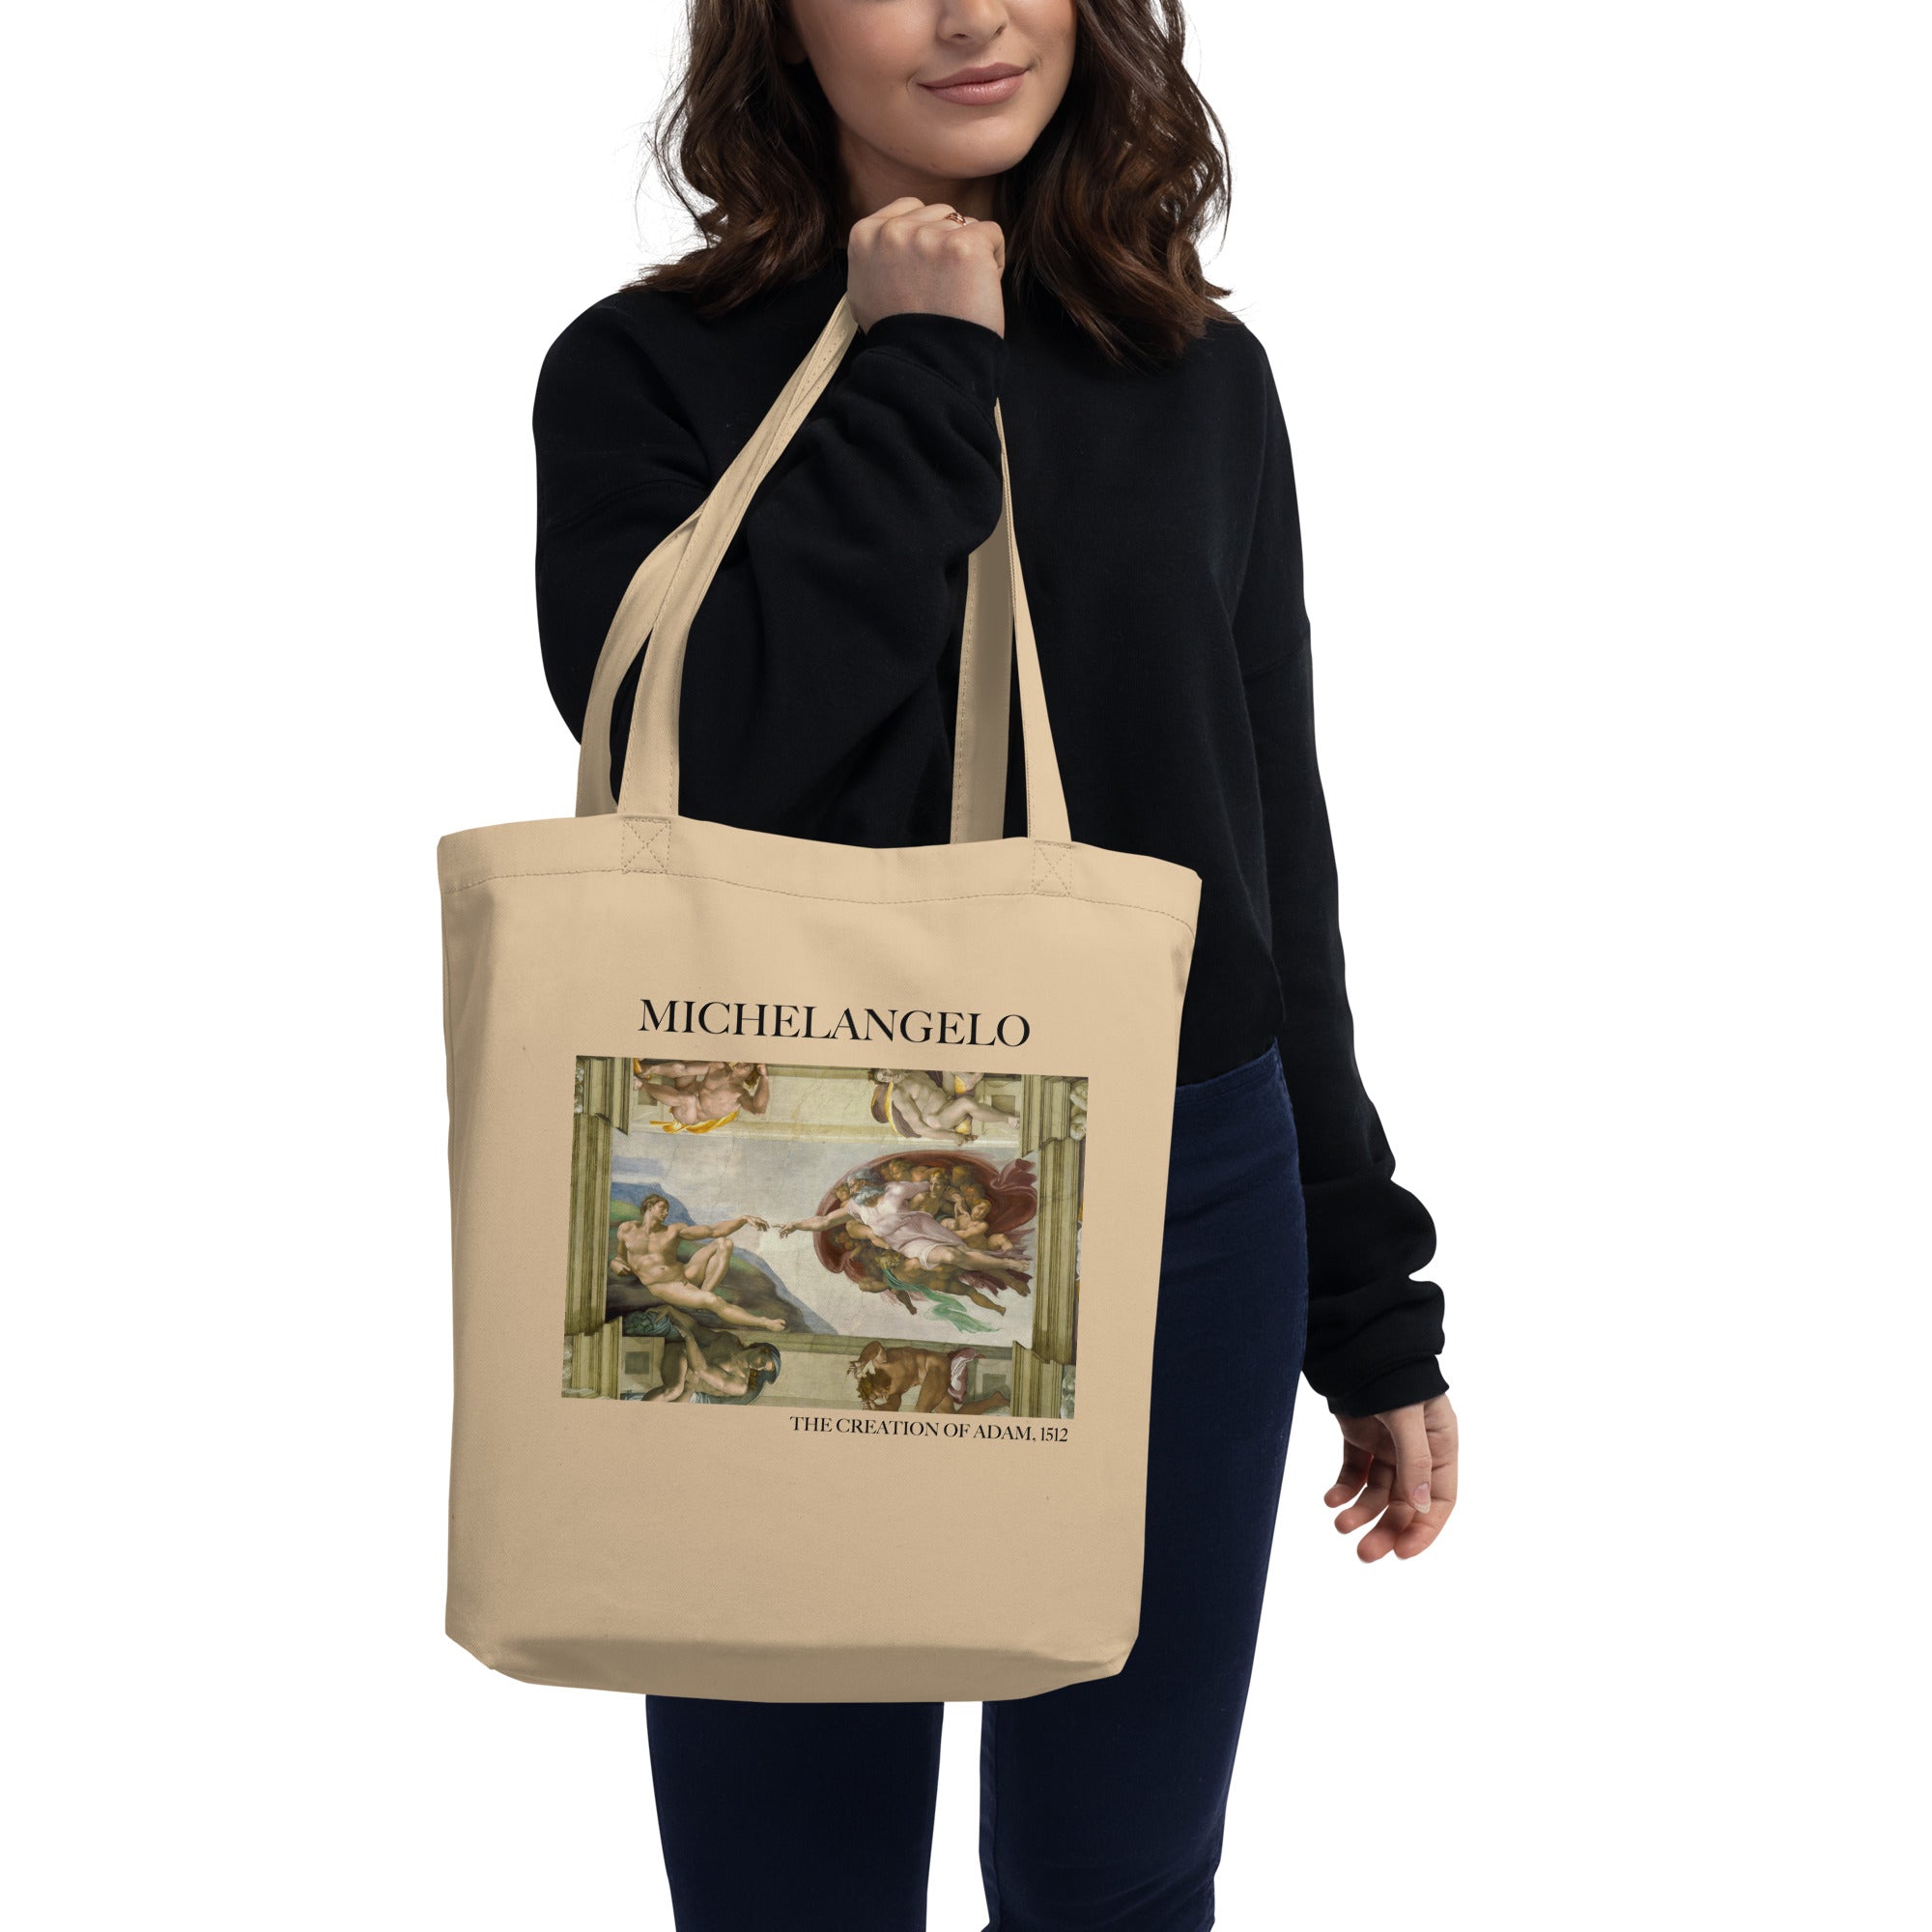 Michelangelo 'The Creation of Adam' Famous Painting Totebag | Eco Friendly Art Tote Bag